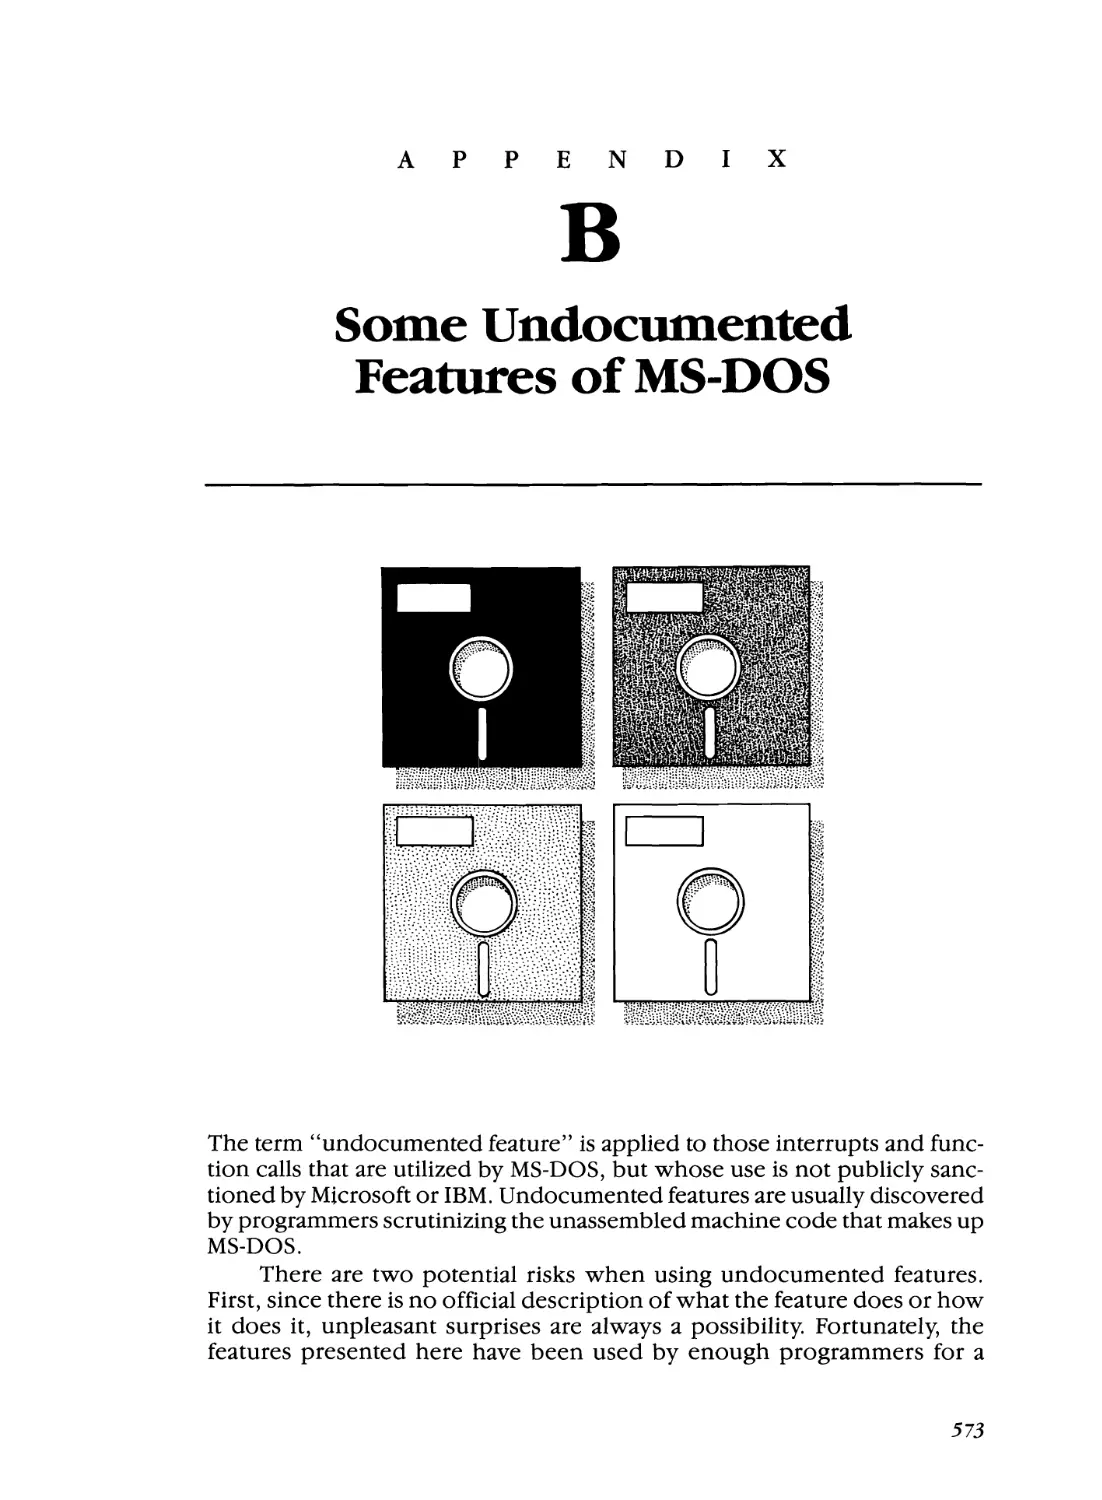 Appendix B - Some Undocumented Features of MS-DOS